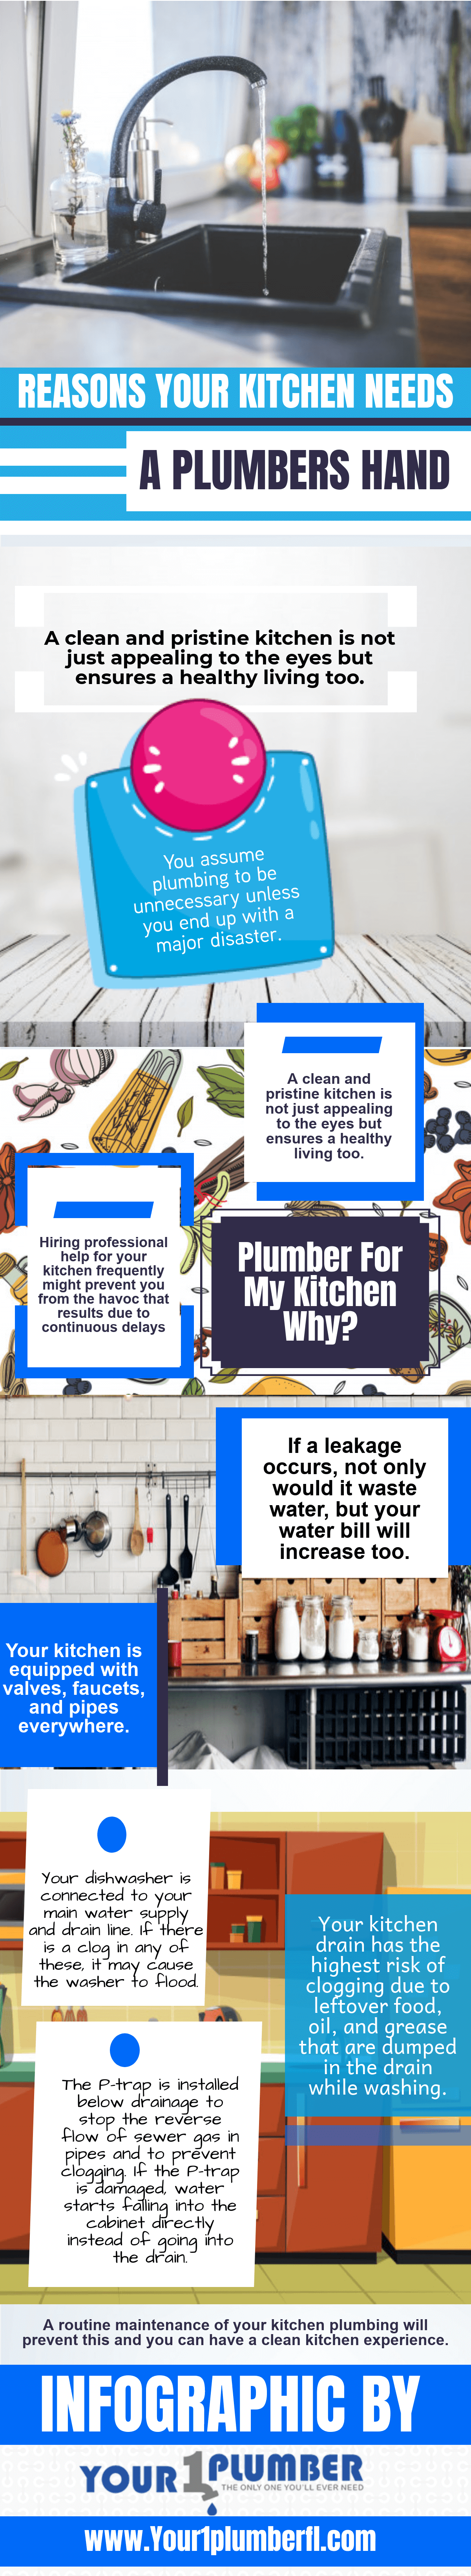 reasons-why-your-kitchen-needs-a-plumbers-hand